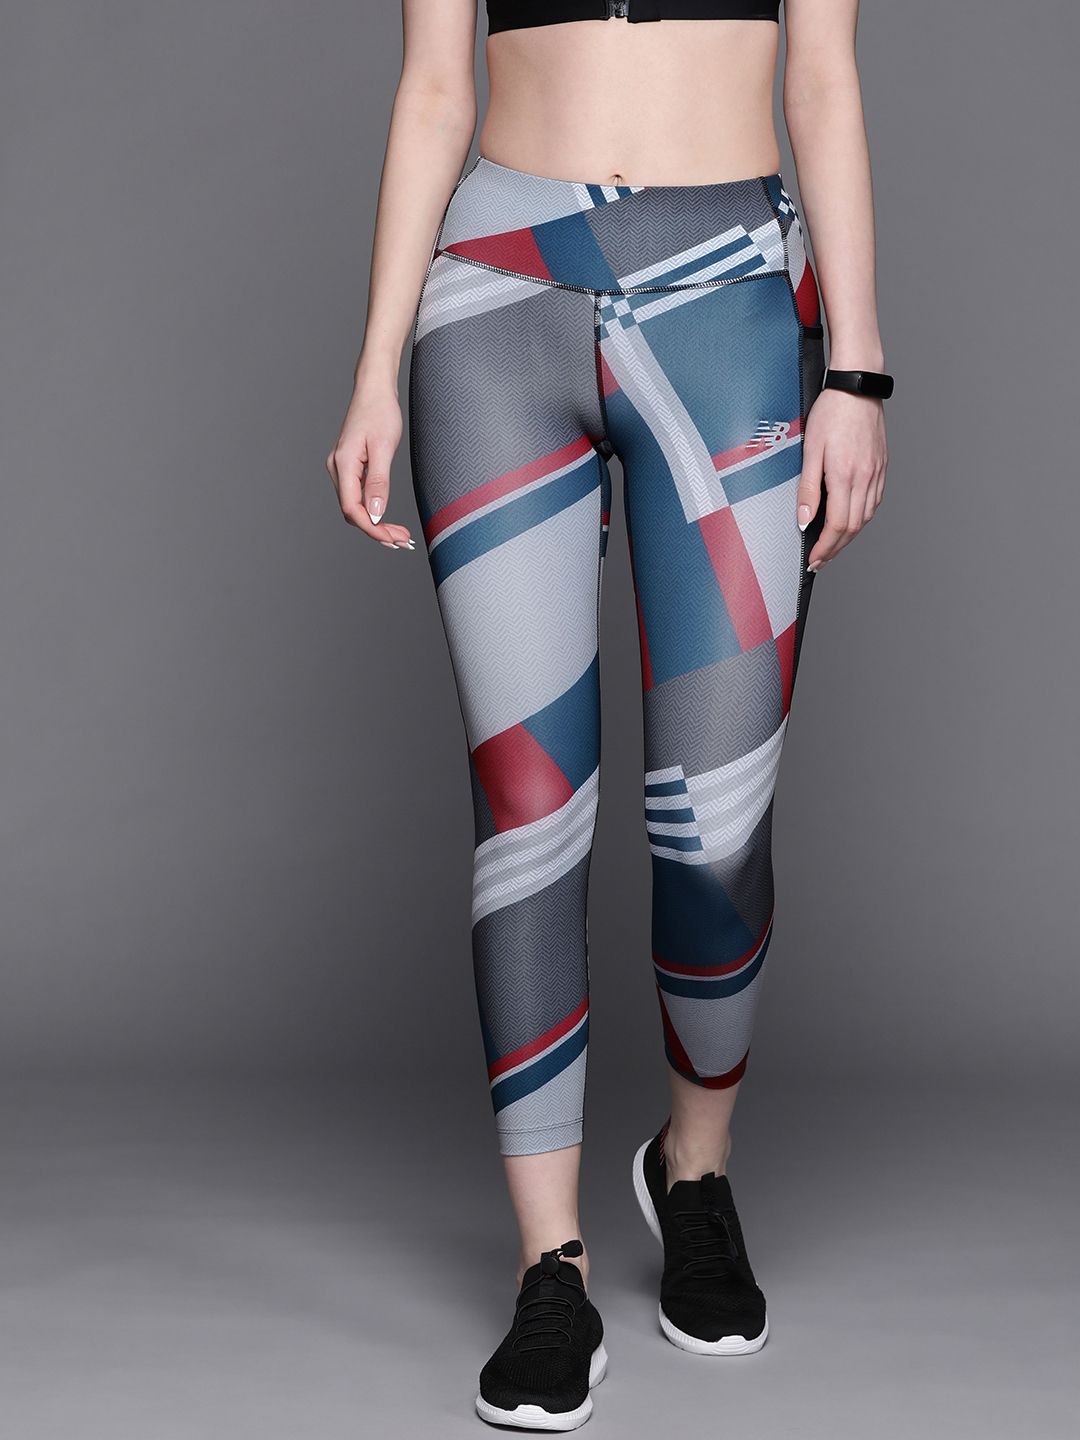 New Balance Women Black & Blue Printed Running Tights Price in India, Full  Specifications & Offers